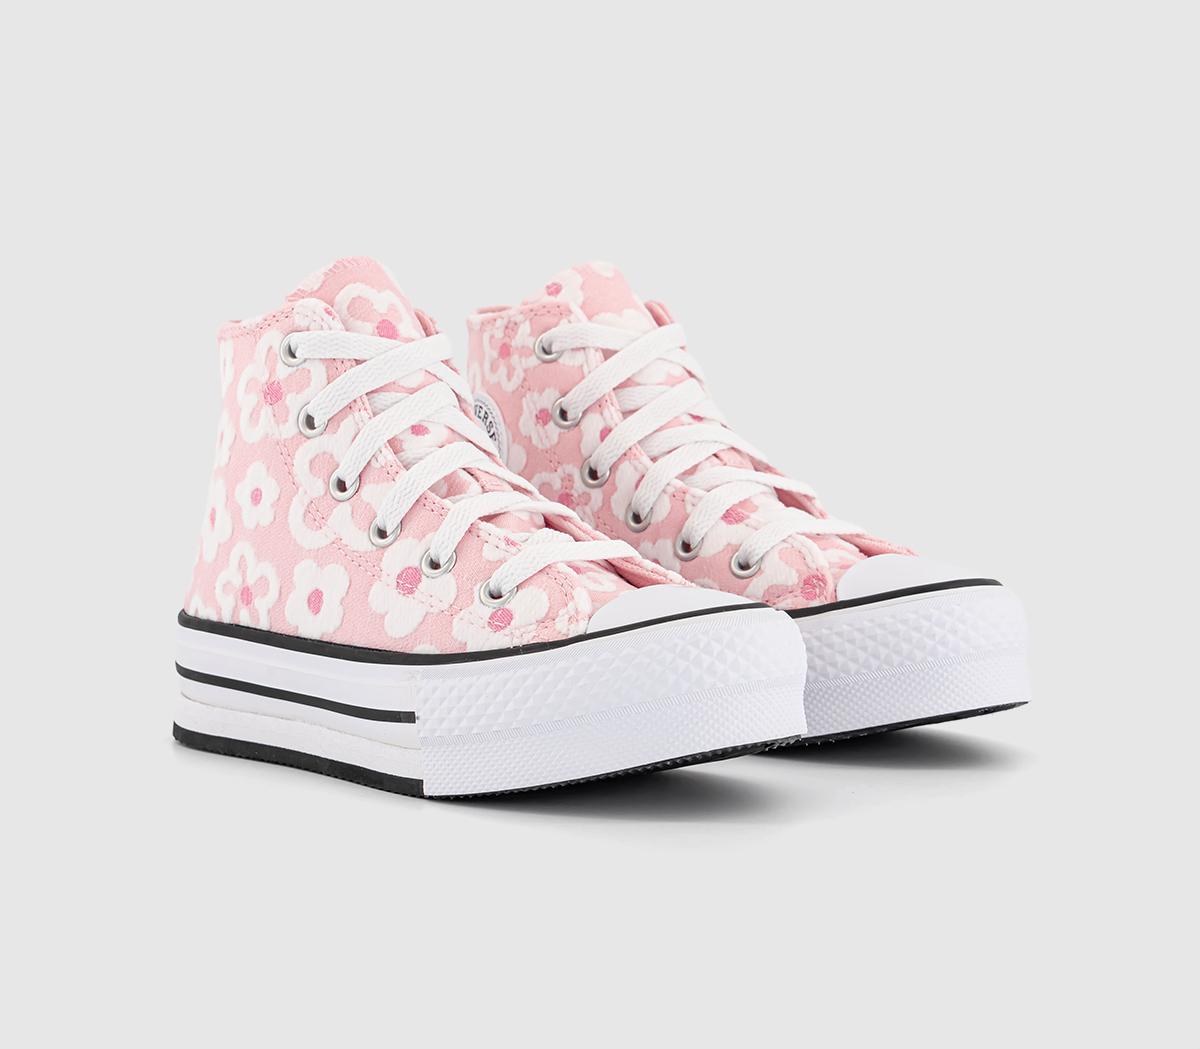 Converse Kids All Star Eva Lift Hi Trainers Donut Glaze Oops Pink White, 13 Youth